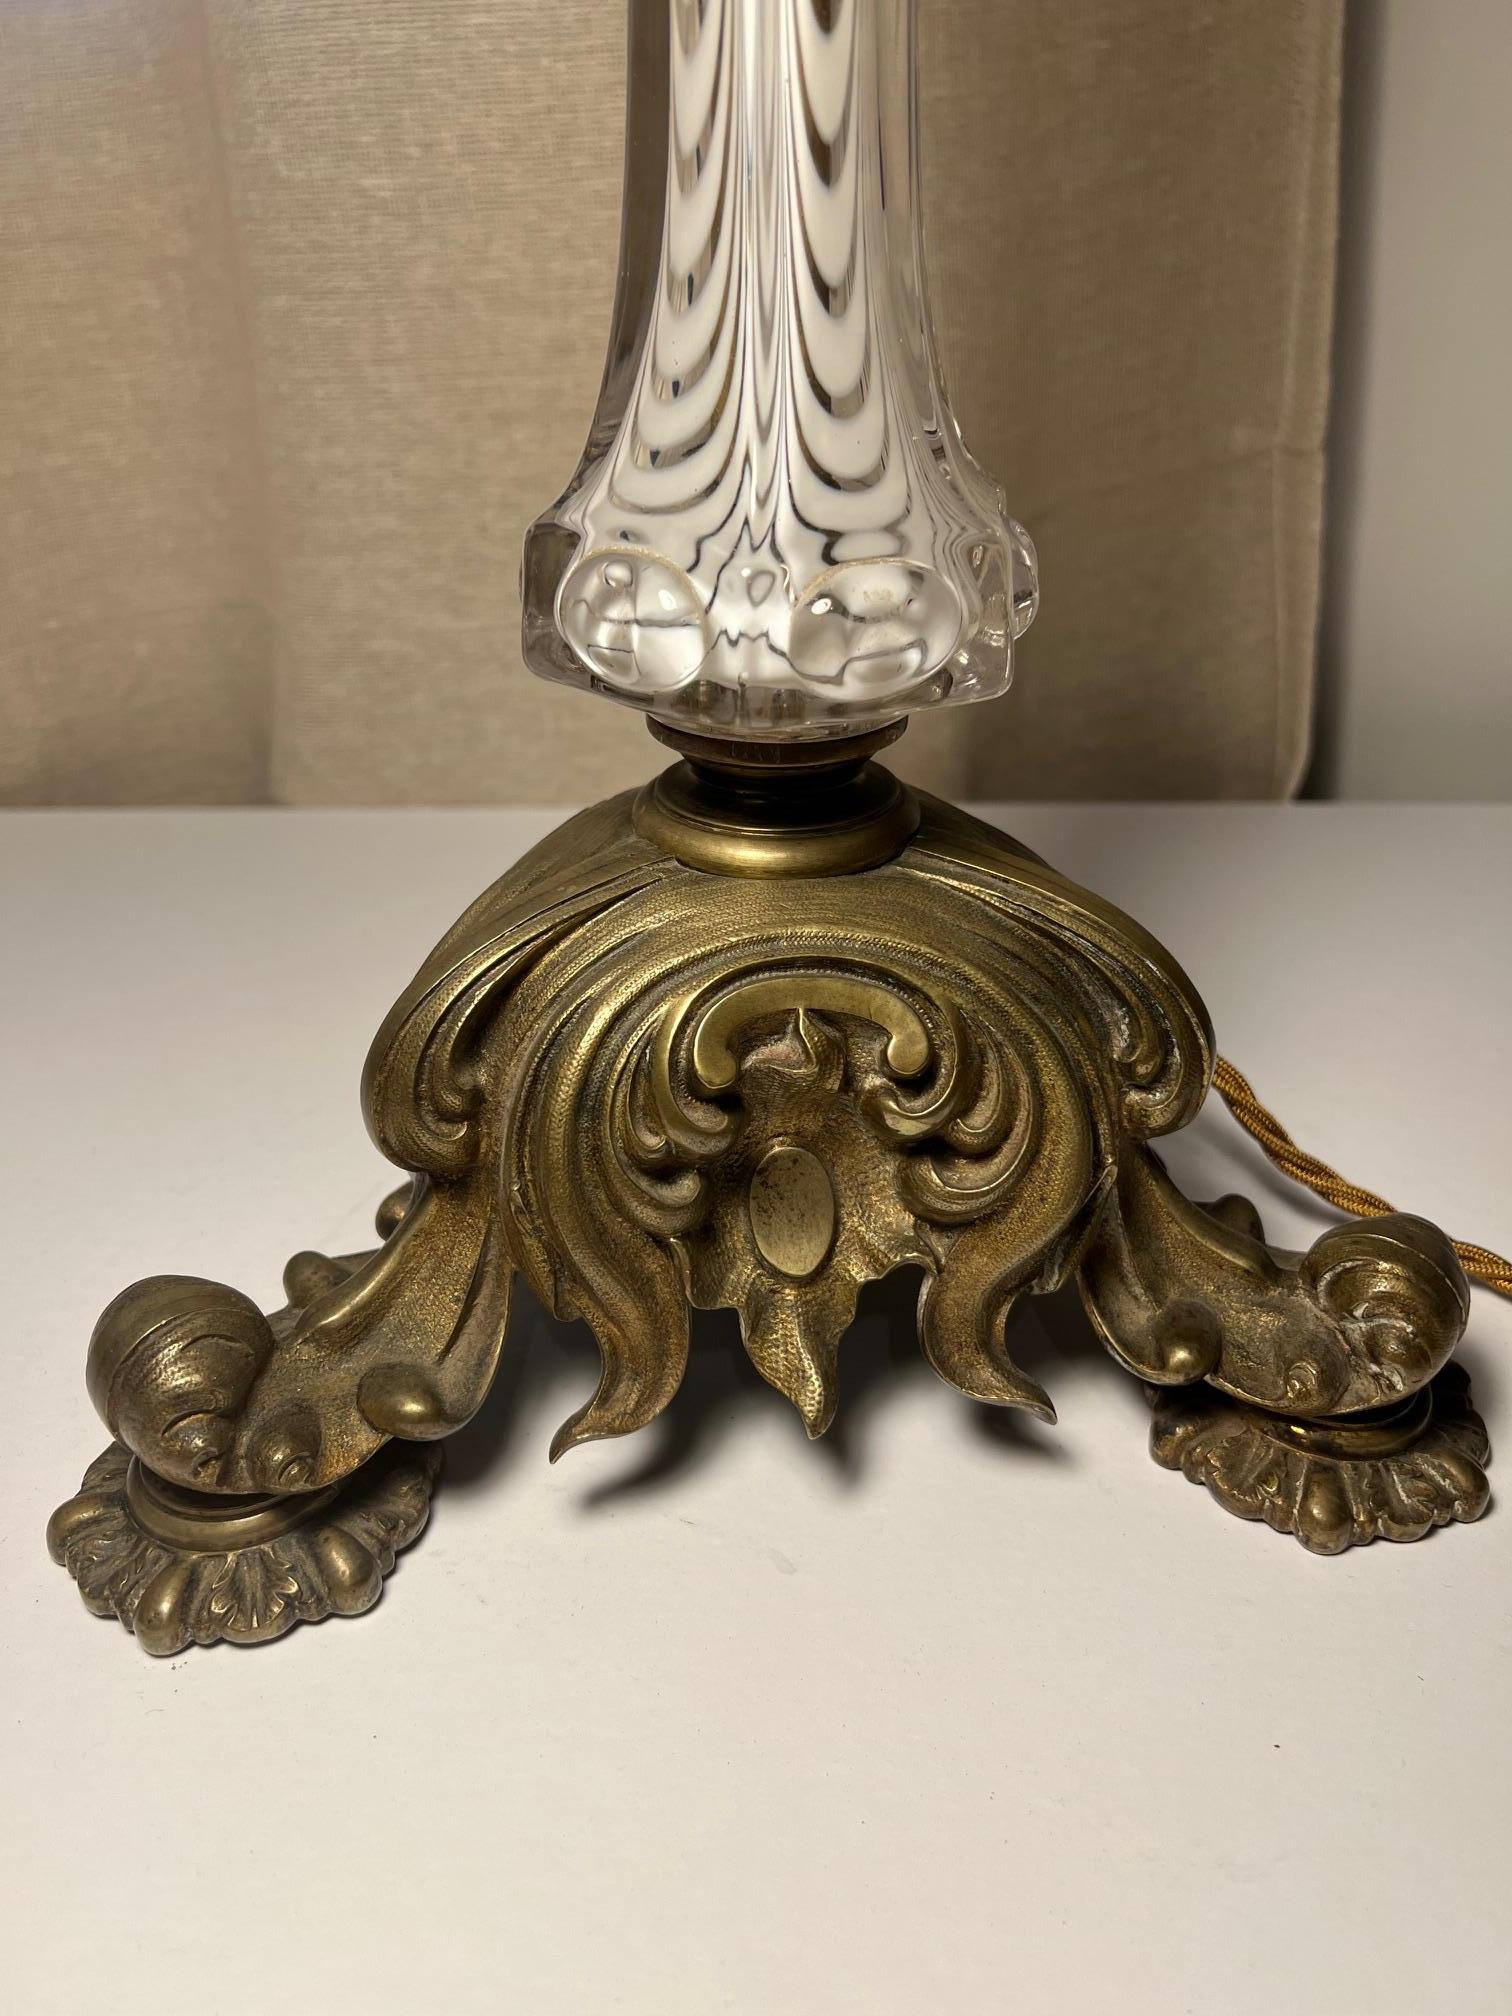 Elegant Rococo style glass & brass oil lamp base, now converted for electricity.

PAT tested and compliant for the U.K.

Can be adapted for worldwide wiring if required. This will have an extra 10 day lead time. 

